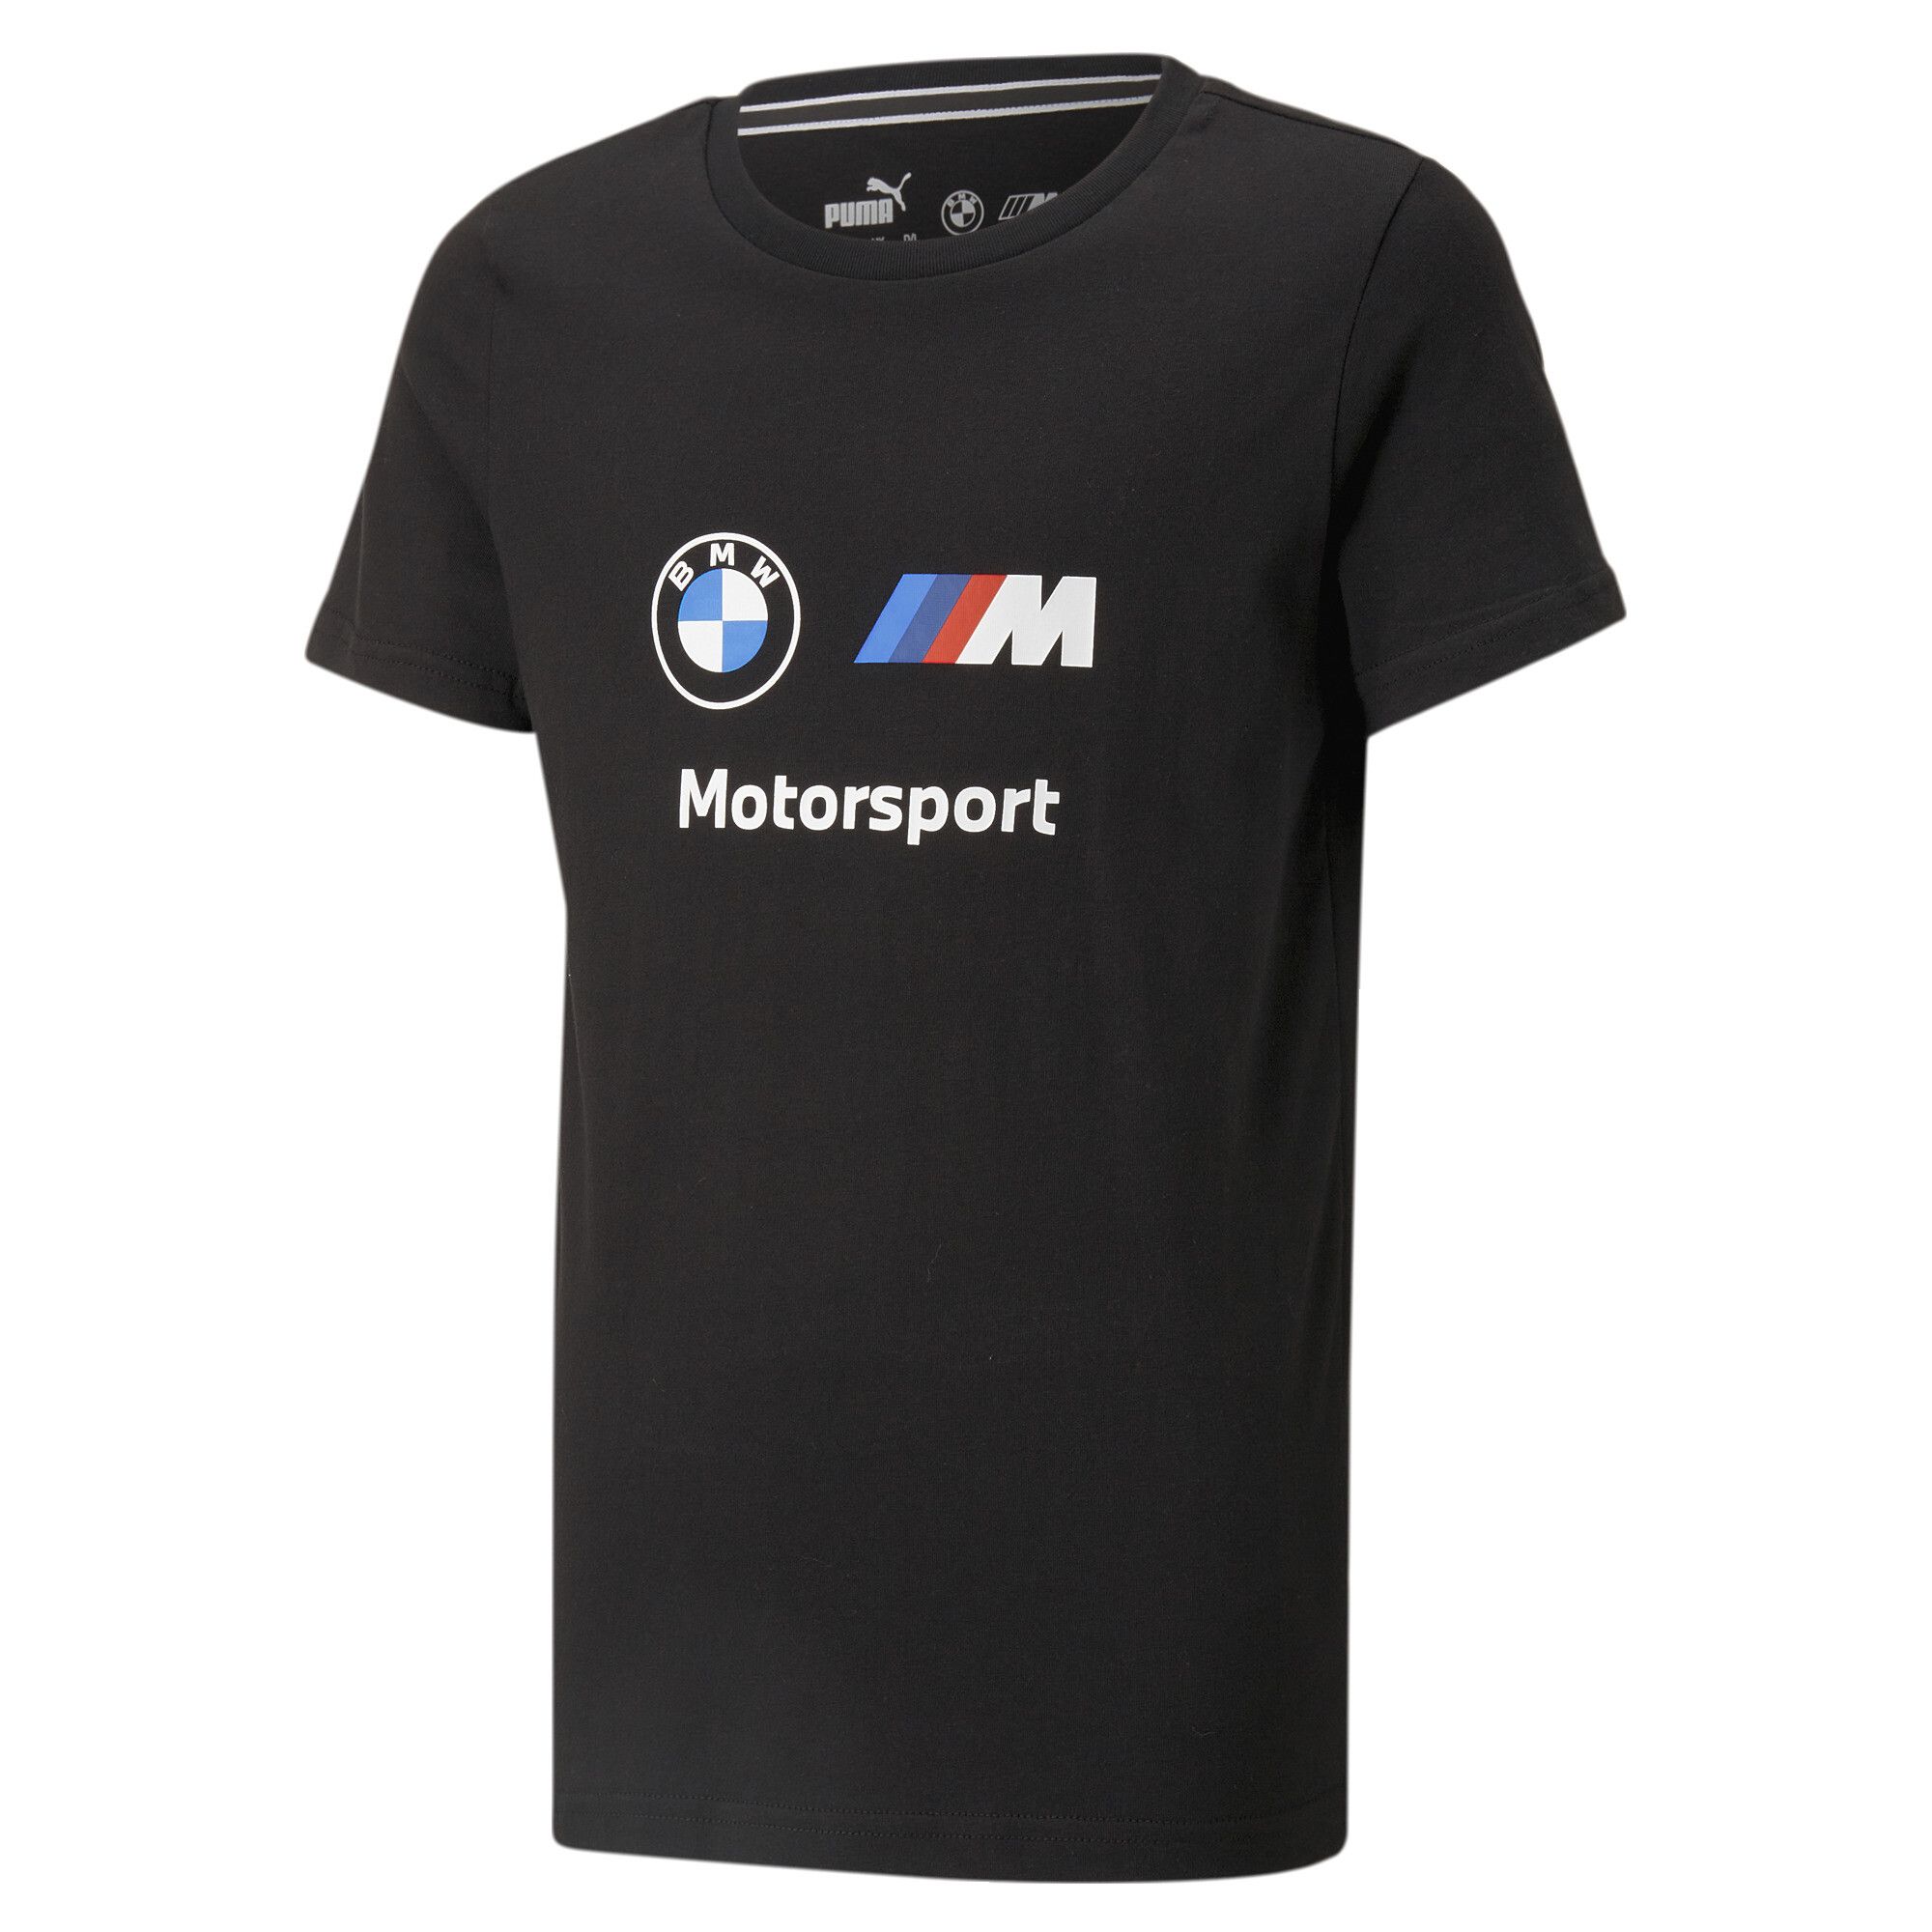 PRODUCT STORY Motor-mad kids and teens will love this striking tee inspired by icons of motorsport. Scaled-down from a men's style, this everyday essential gets a pop of race track-inspired style thanks to BMW M Motorsport logos that adorn the design. Time to rev it up pitside and beyond. FEATURES & BENEFITS : Recycled Content: Made with at least 20% recycled material as a step toward a better future DETAILS : BMW M Motorsport logos PUMA branding details Comfortable style by PUMA